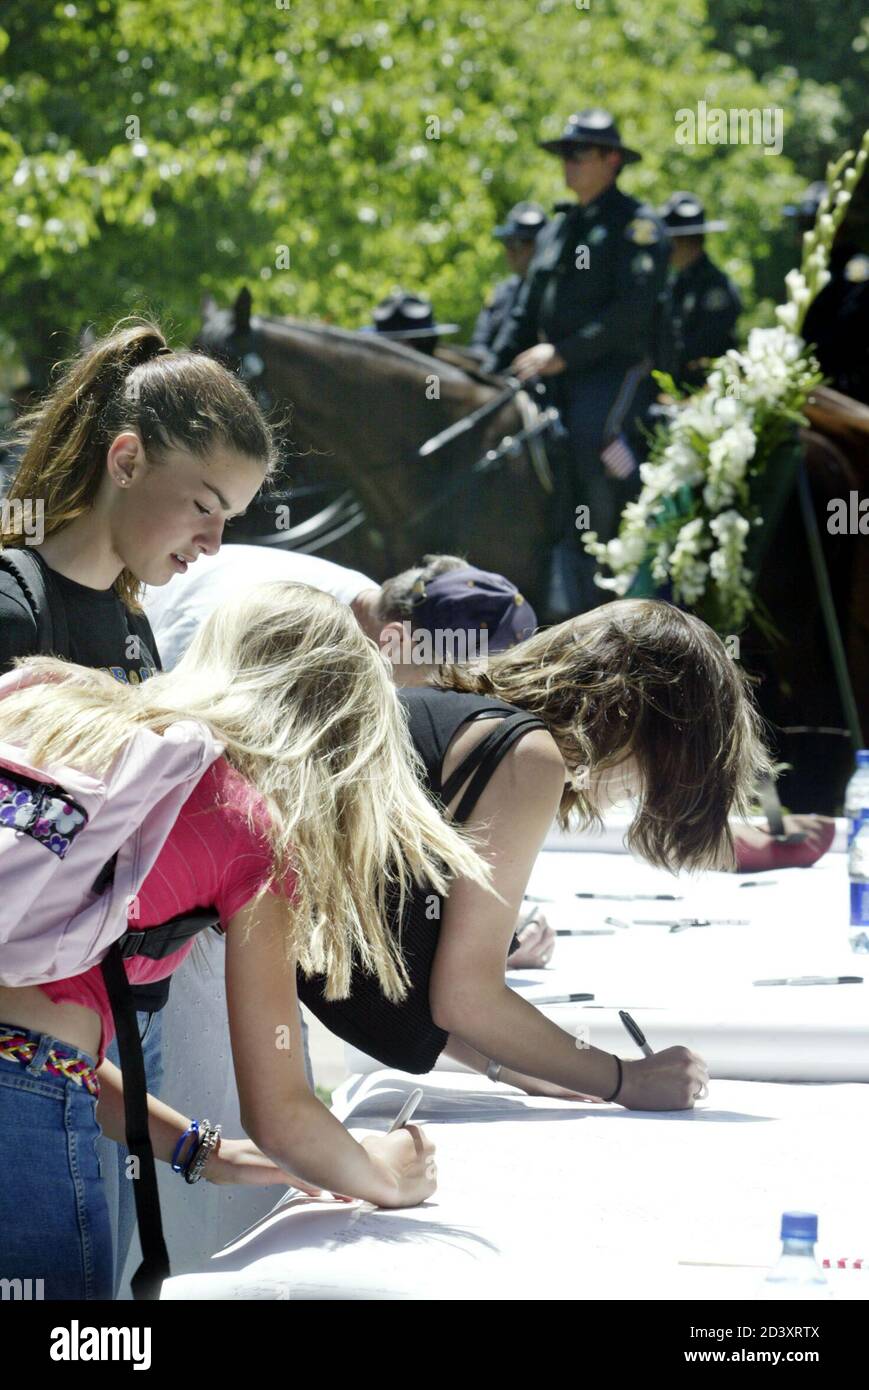 Young girls sign a condolence poster before the memorial for former NFL player Pat Tillman, in the San Jose Memorial Rose Garden, May 3, 2004. Tillman, who played professional football for the Arizona Cardinals, turned down a $3.6 million contract from the team to sign up with the Army in 2002. He was killed in combat in Afghanistan on April 22, 2004. He was awarded the U.S. military's prestigious Silver Star posthumously, the Army Special Forces Command said. REUTERS/Susan Ragan  SR/HK Stock Photo